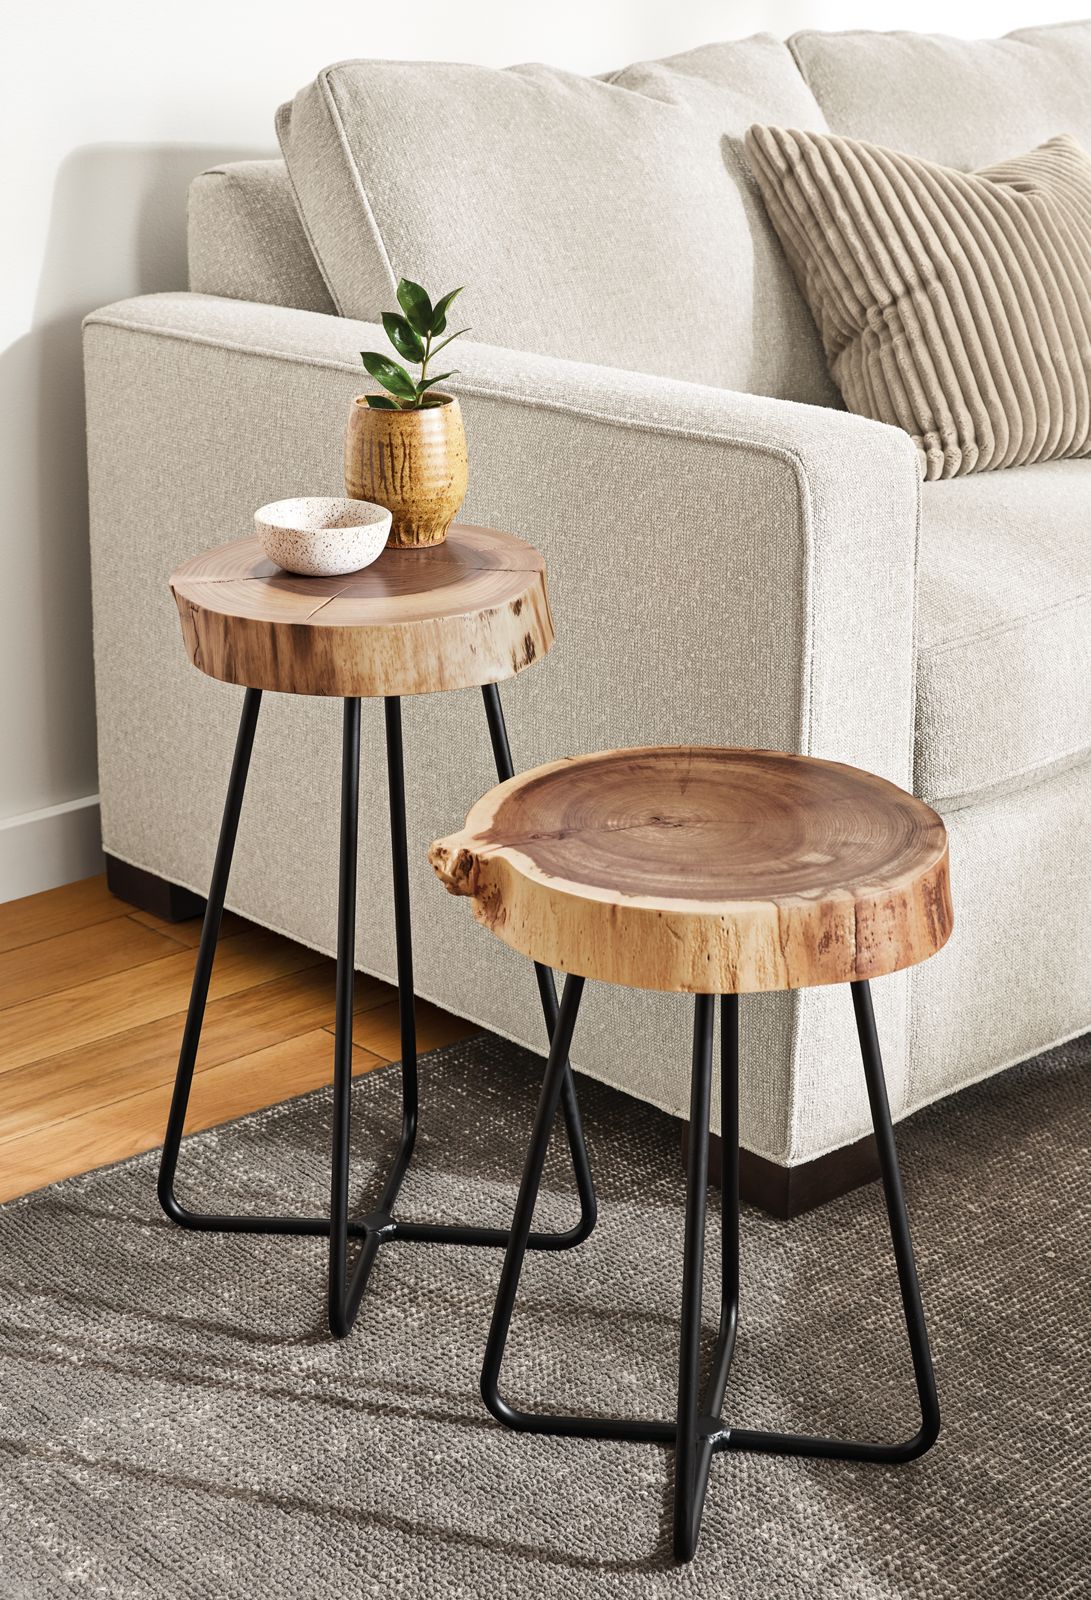 Wellington End Tables in Elm & Walnut - How to Add an Accent Table ...